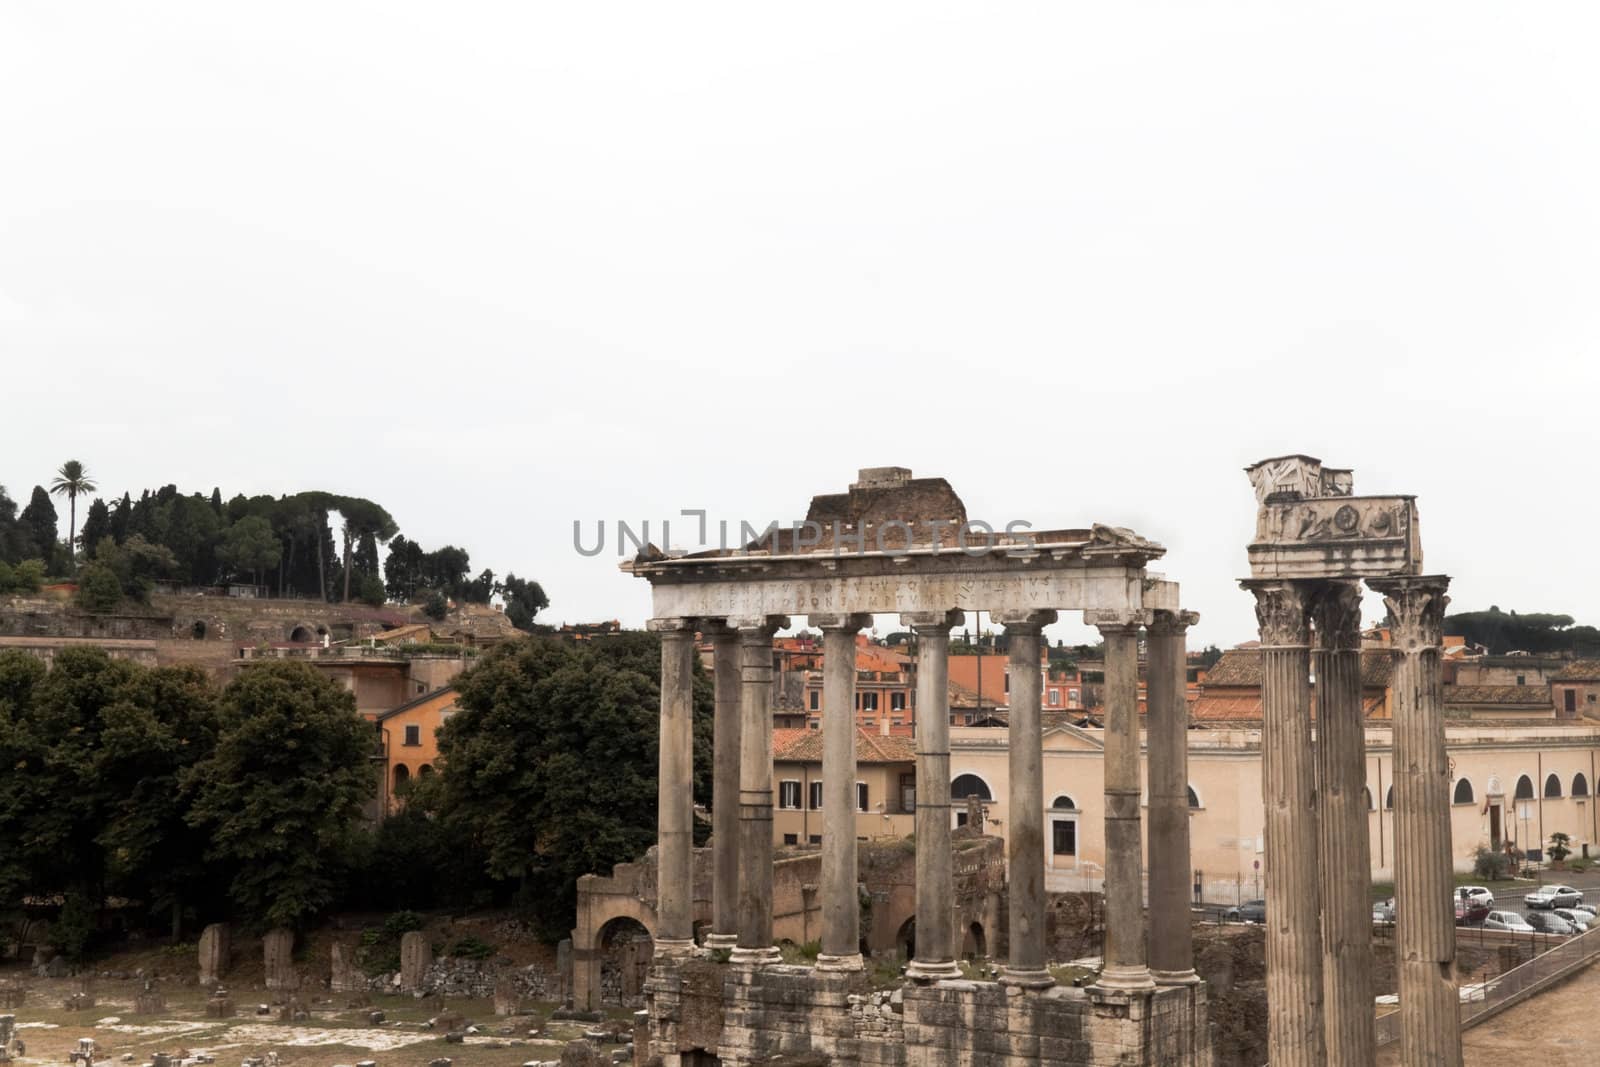 The Roman Forum at the heart of Rome (Roma) Italy